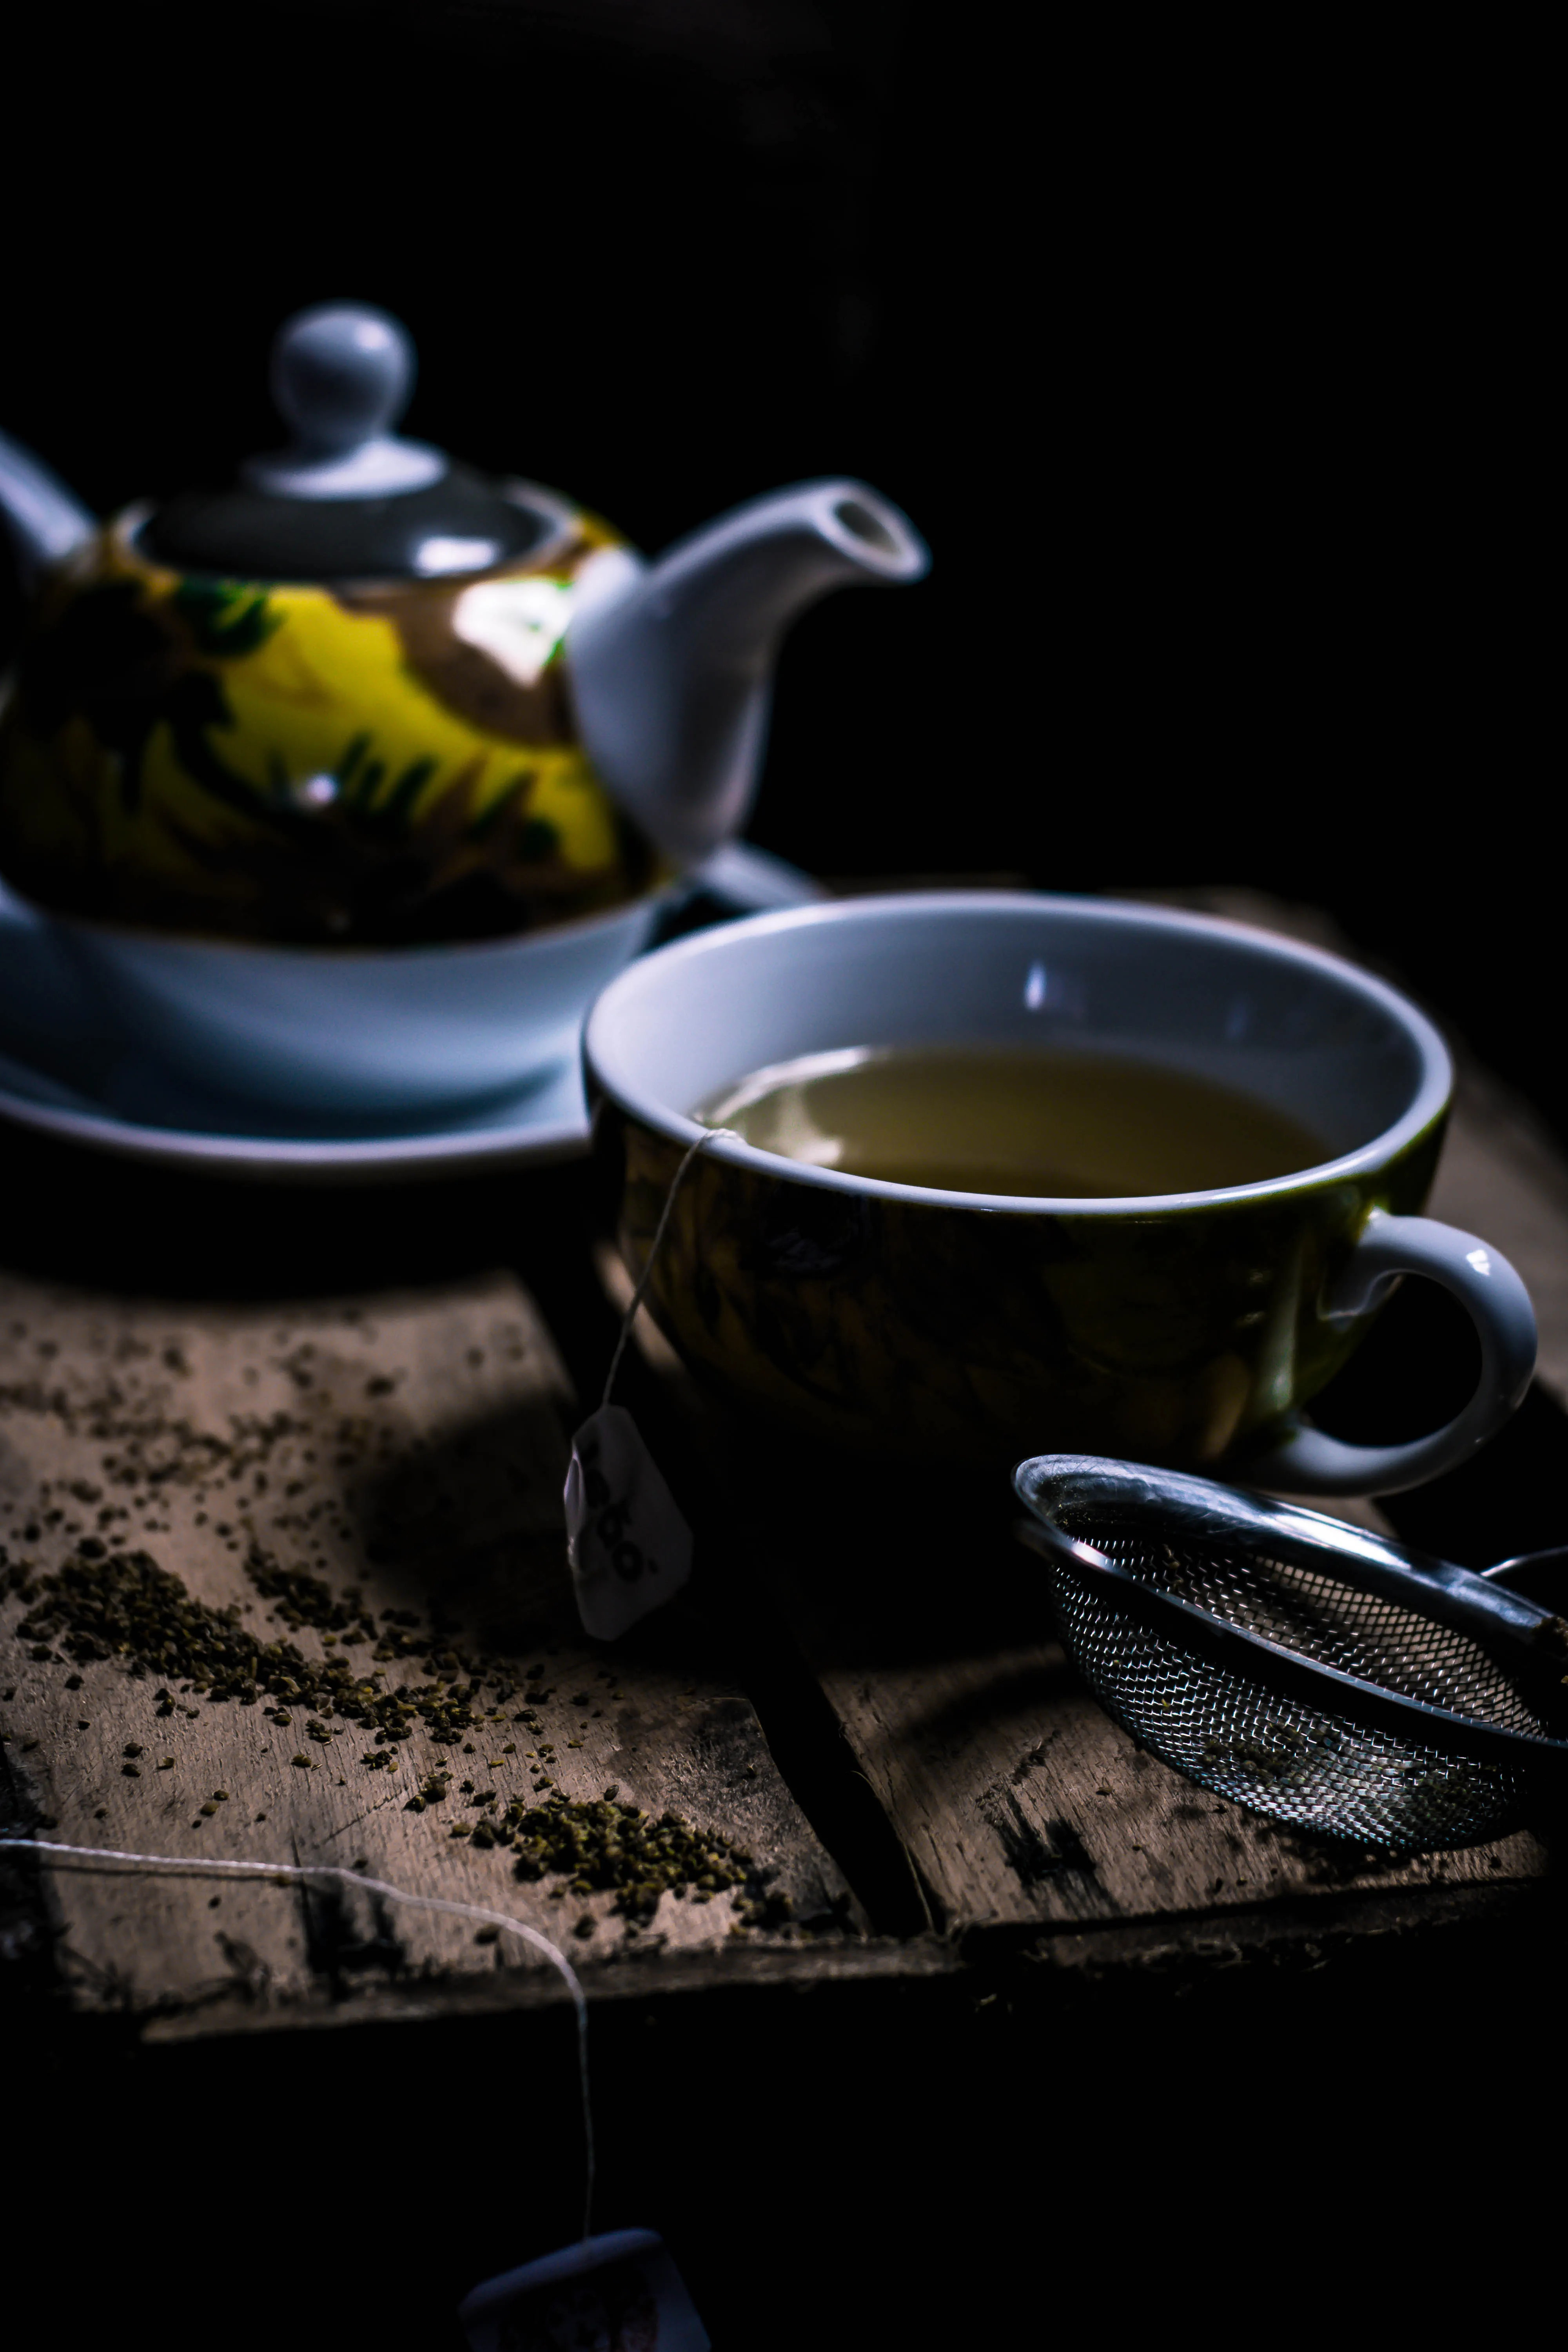 Green tea in a cup and kettle